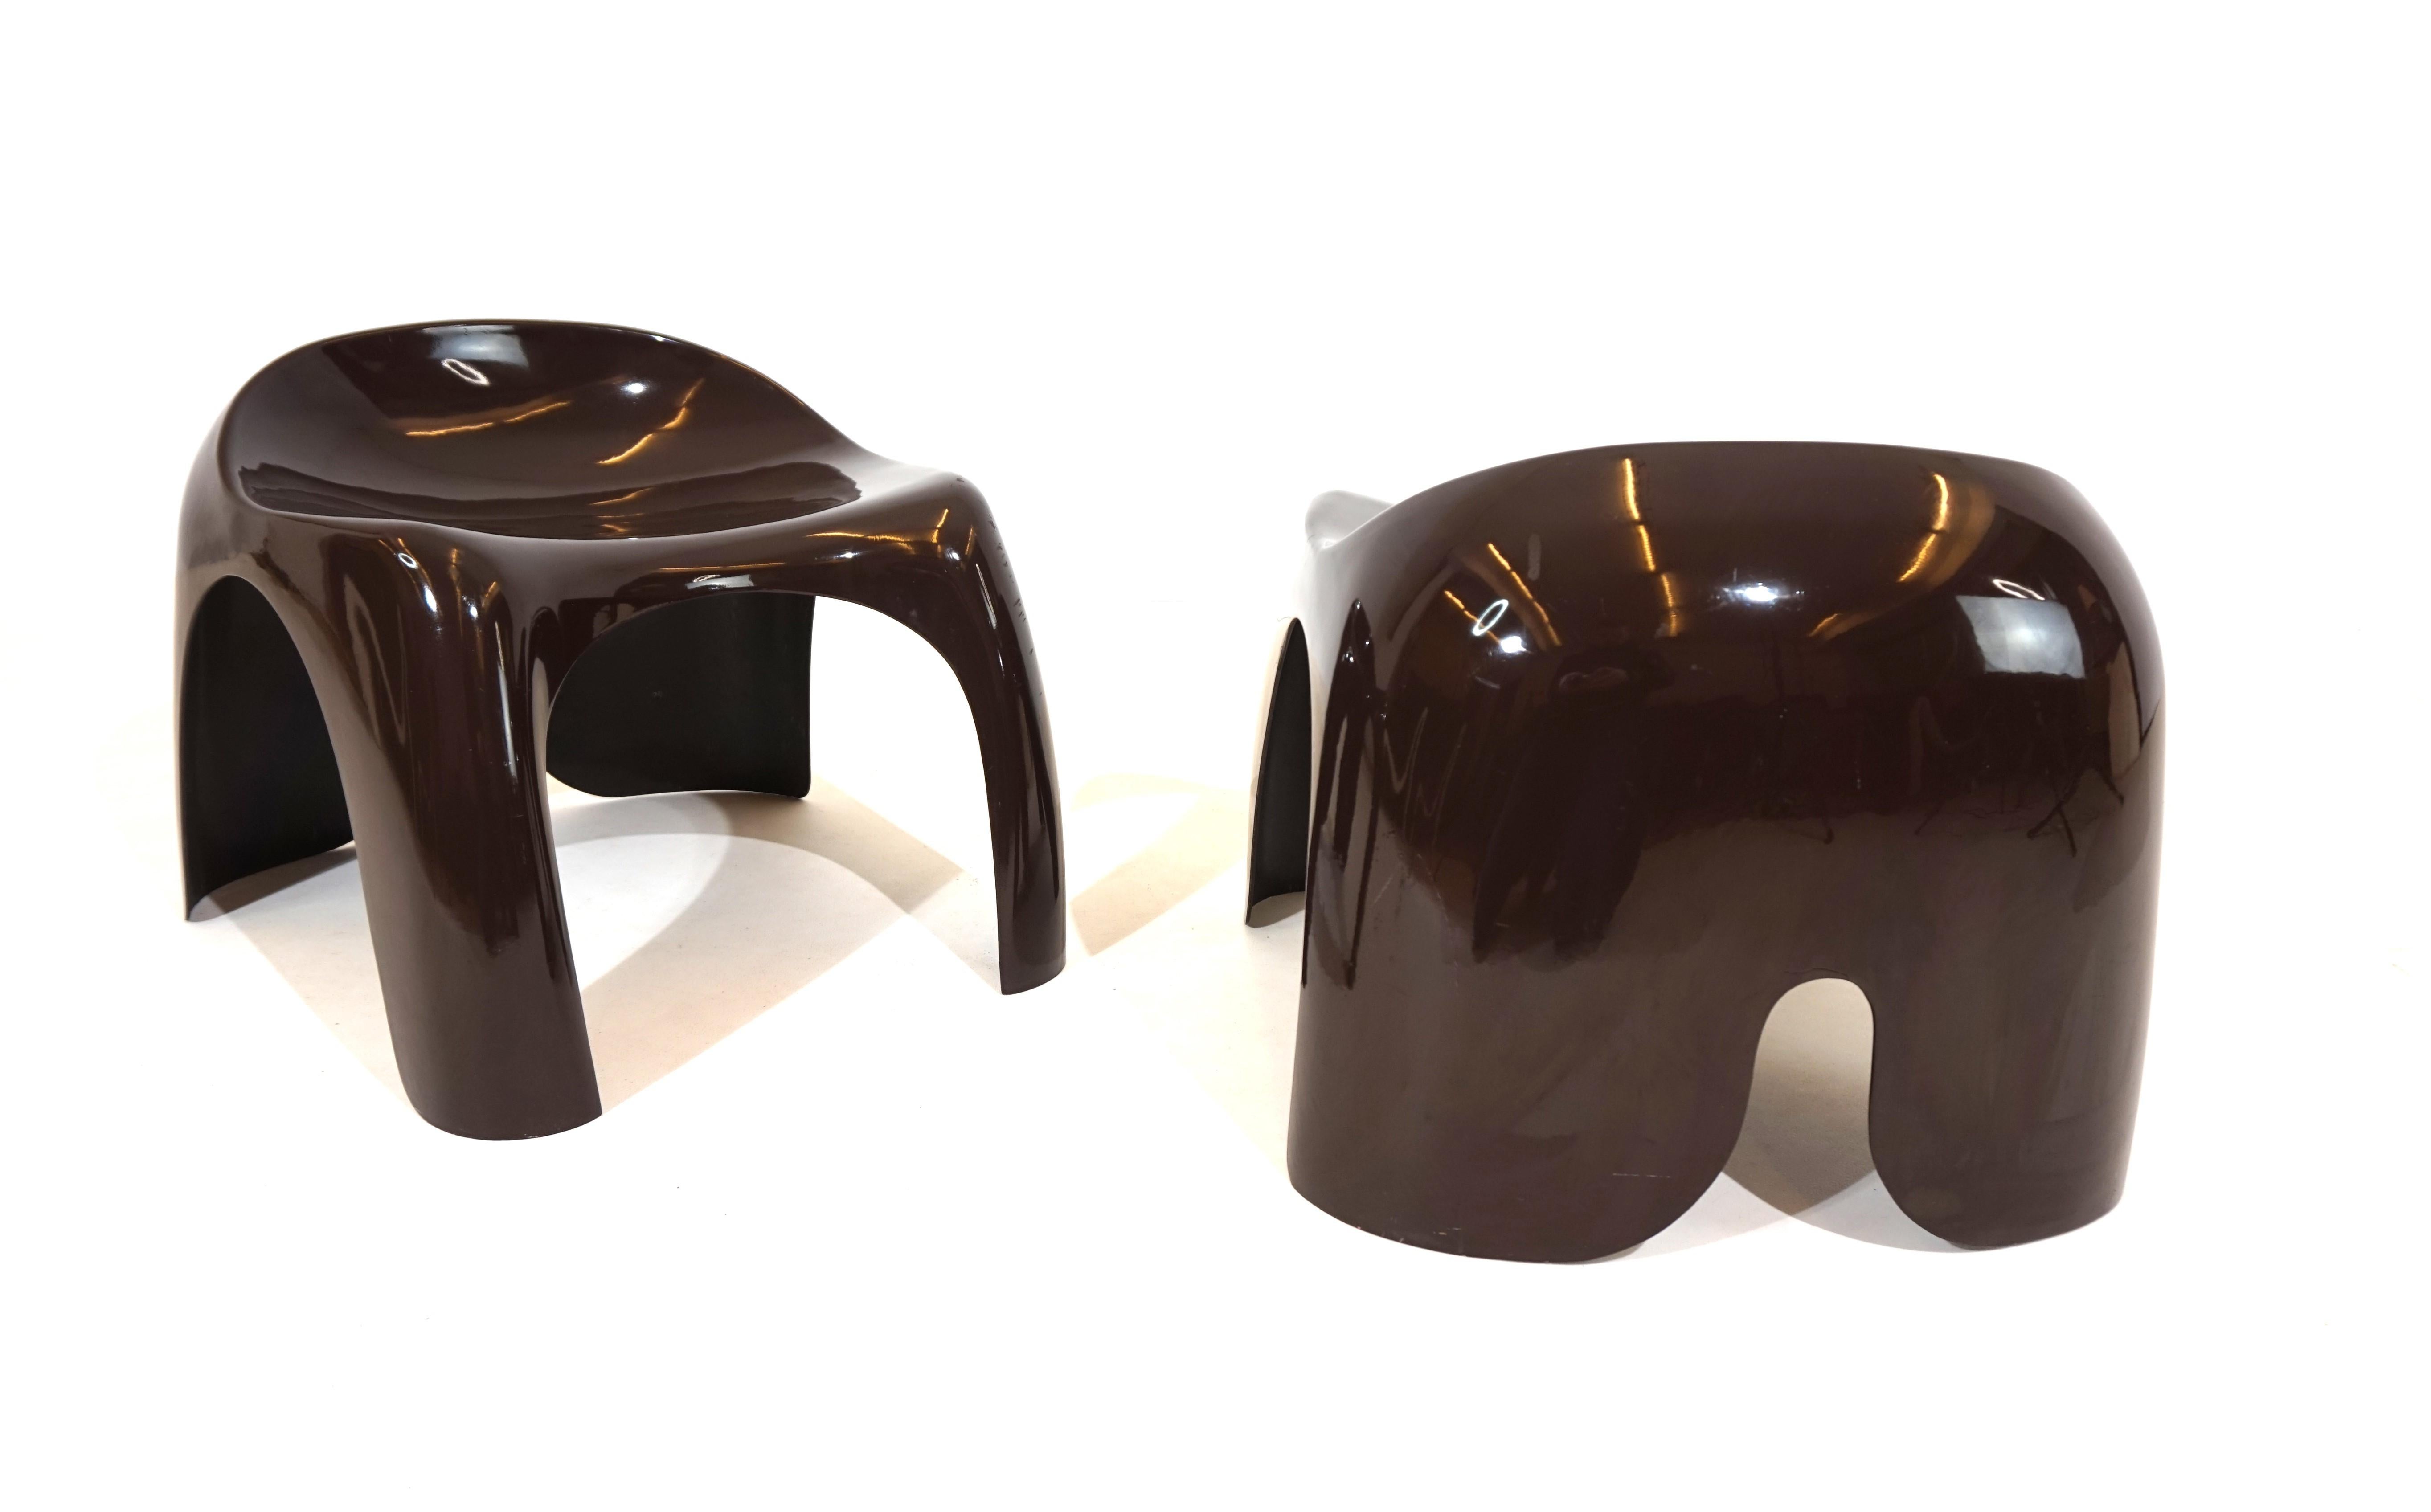 A chocolate brown pair of Efebo stools in good condition. The plastic bowls are in good condition apart from a few scratches on the corner of a stool.  These low seaters are stackable. In their design, worthy representatives of the Space Age.

